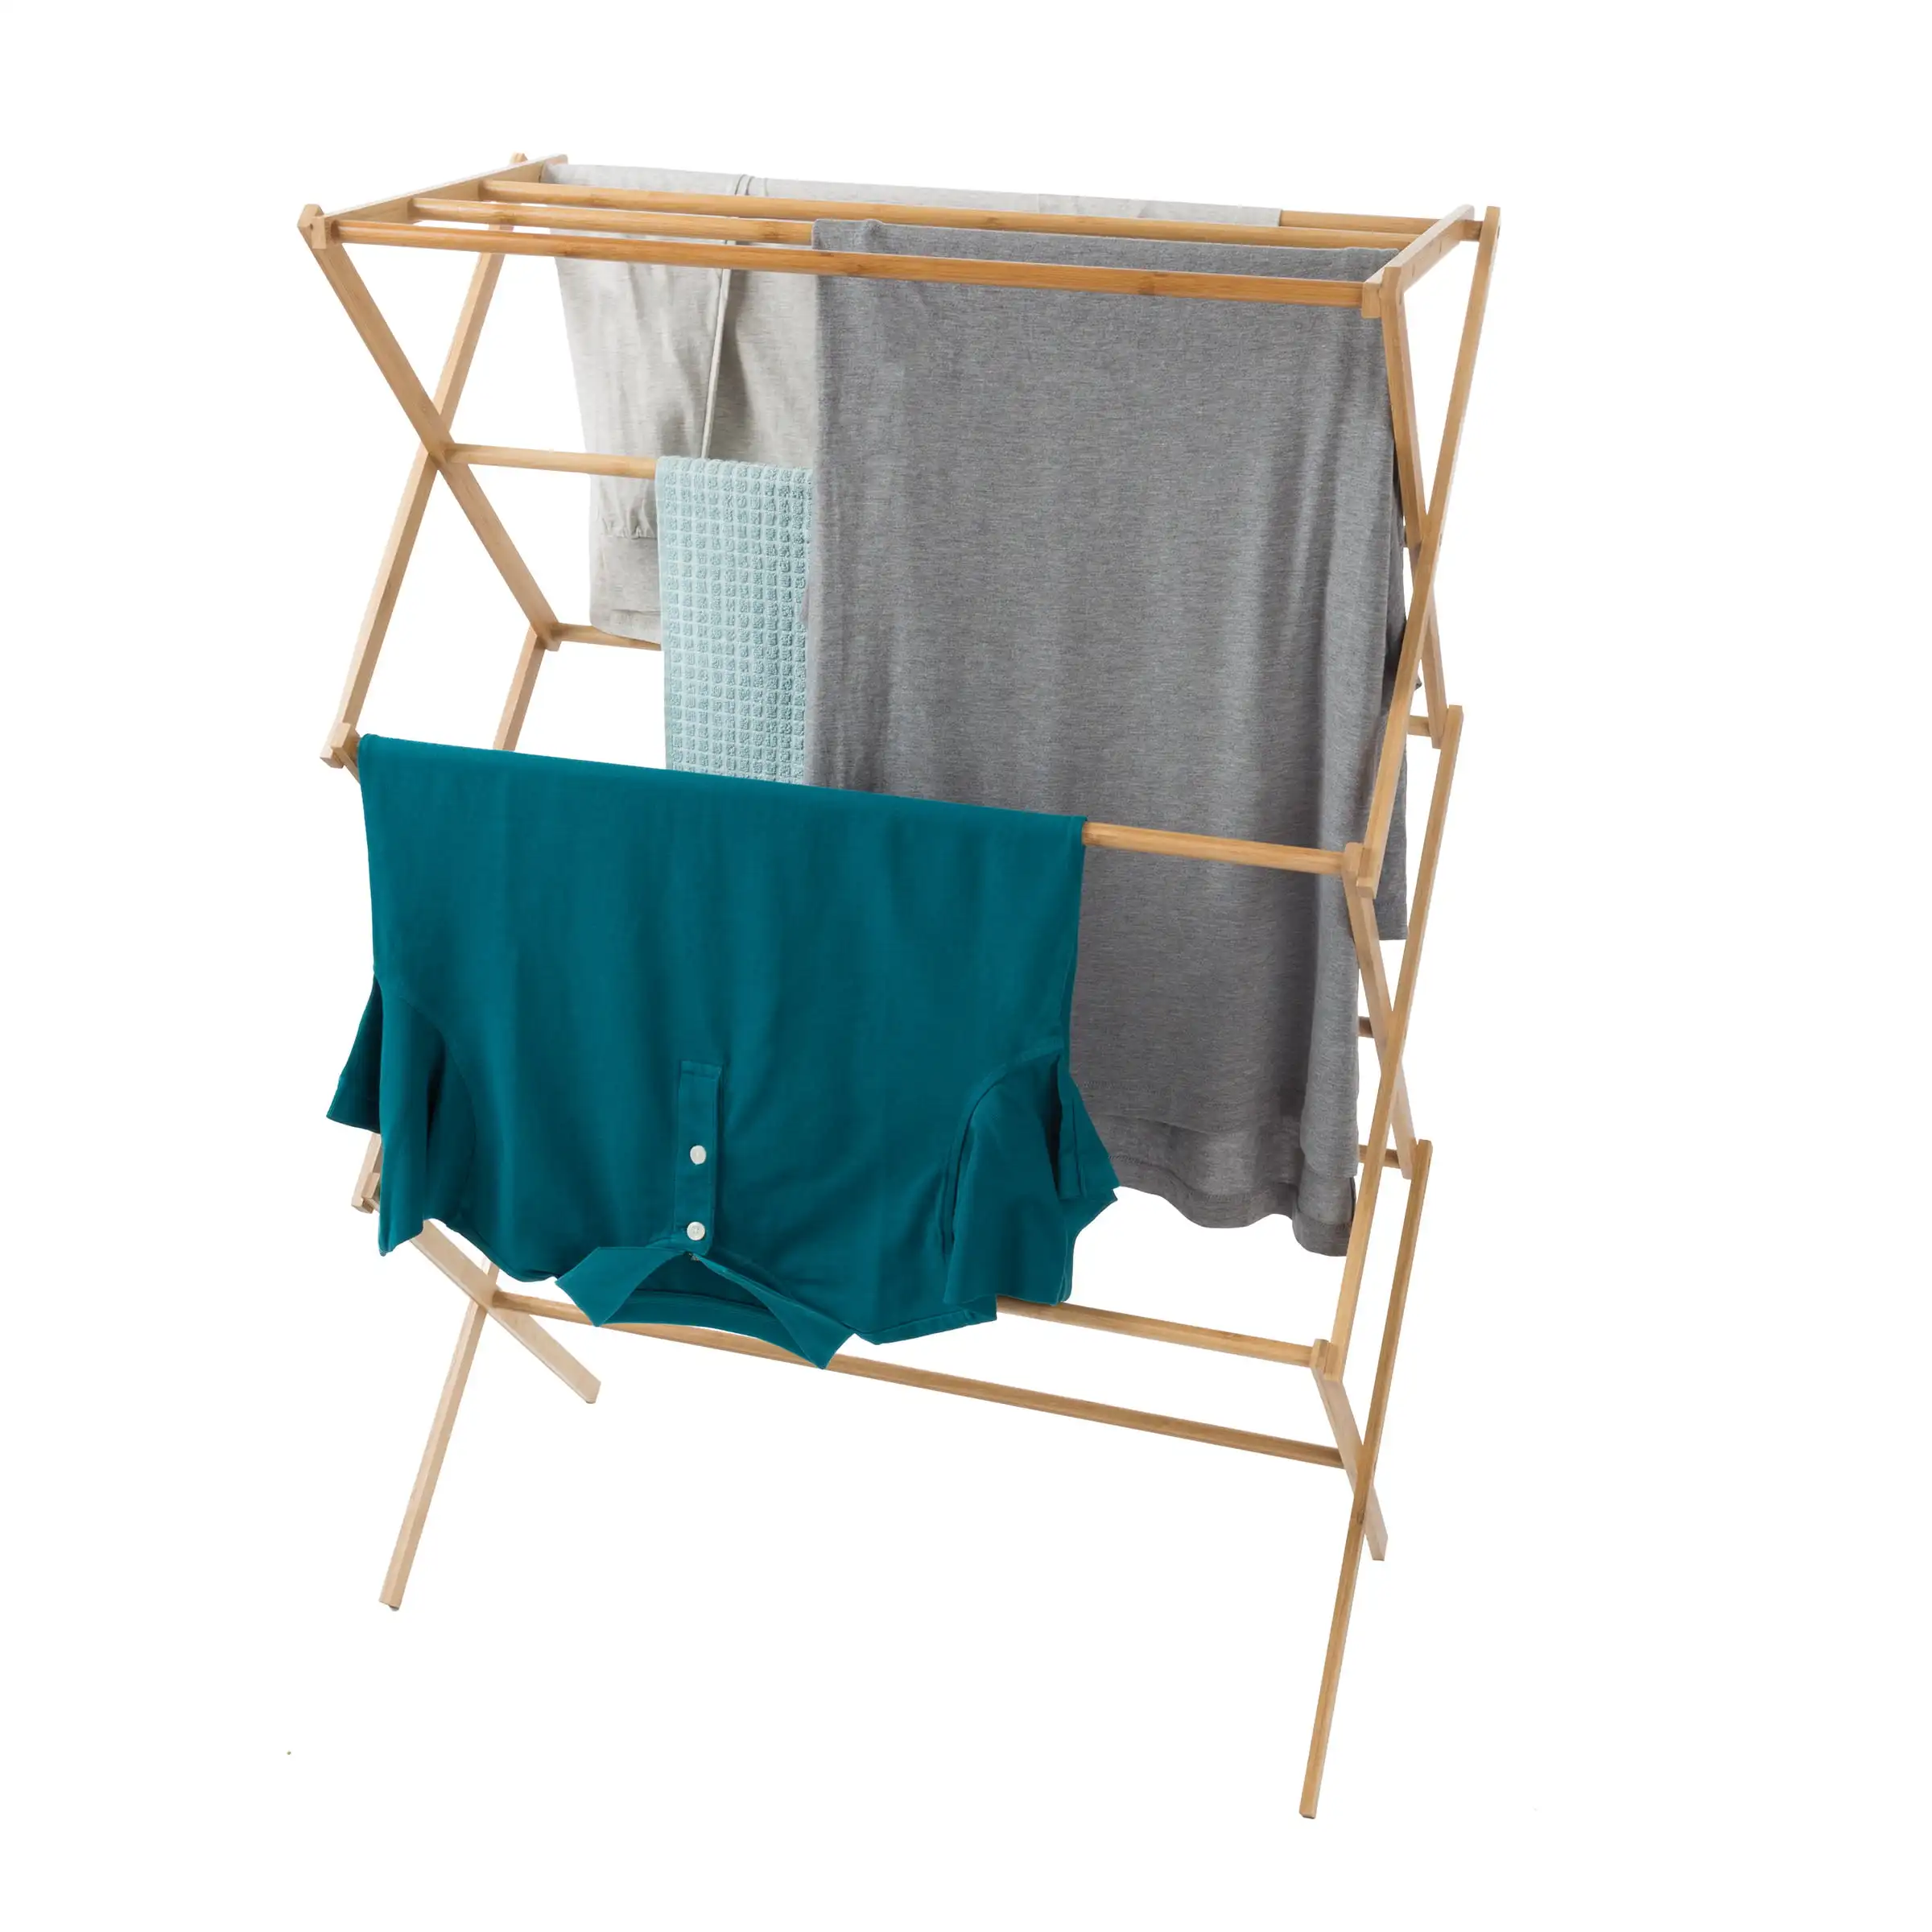 

Portable Bamboo Clothes Drying Rack- Collapsible and Compact for Indoor/Outdoor Use By Lavish Home